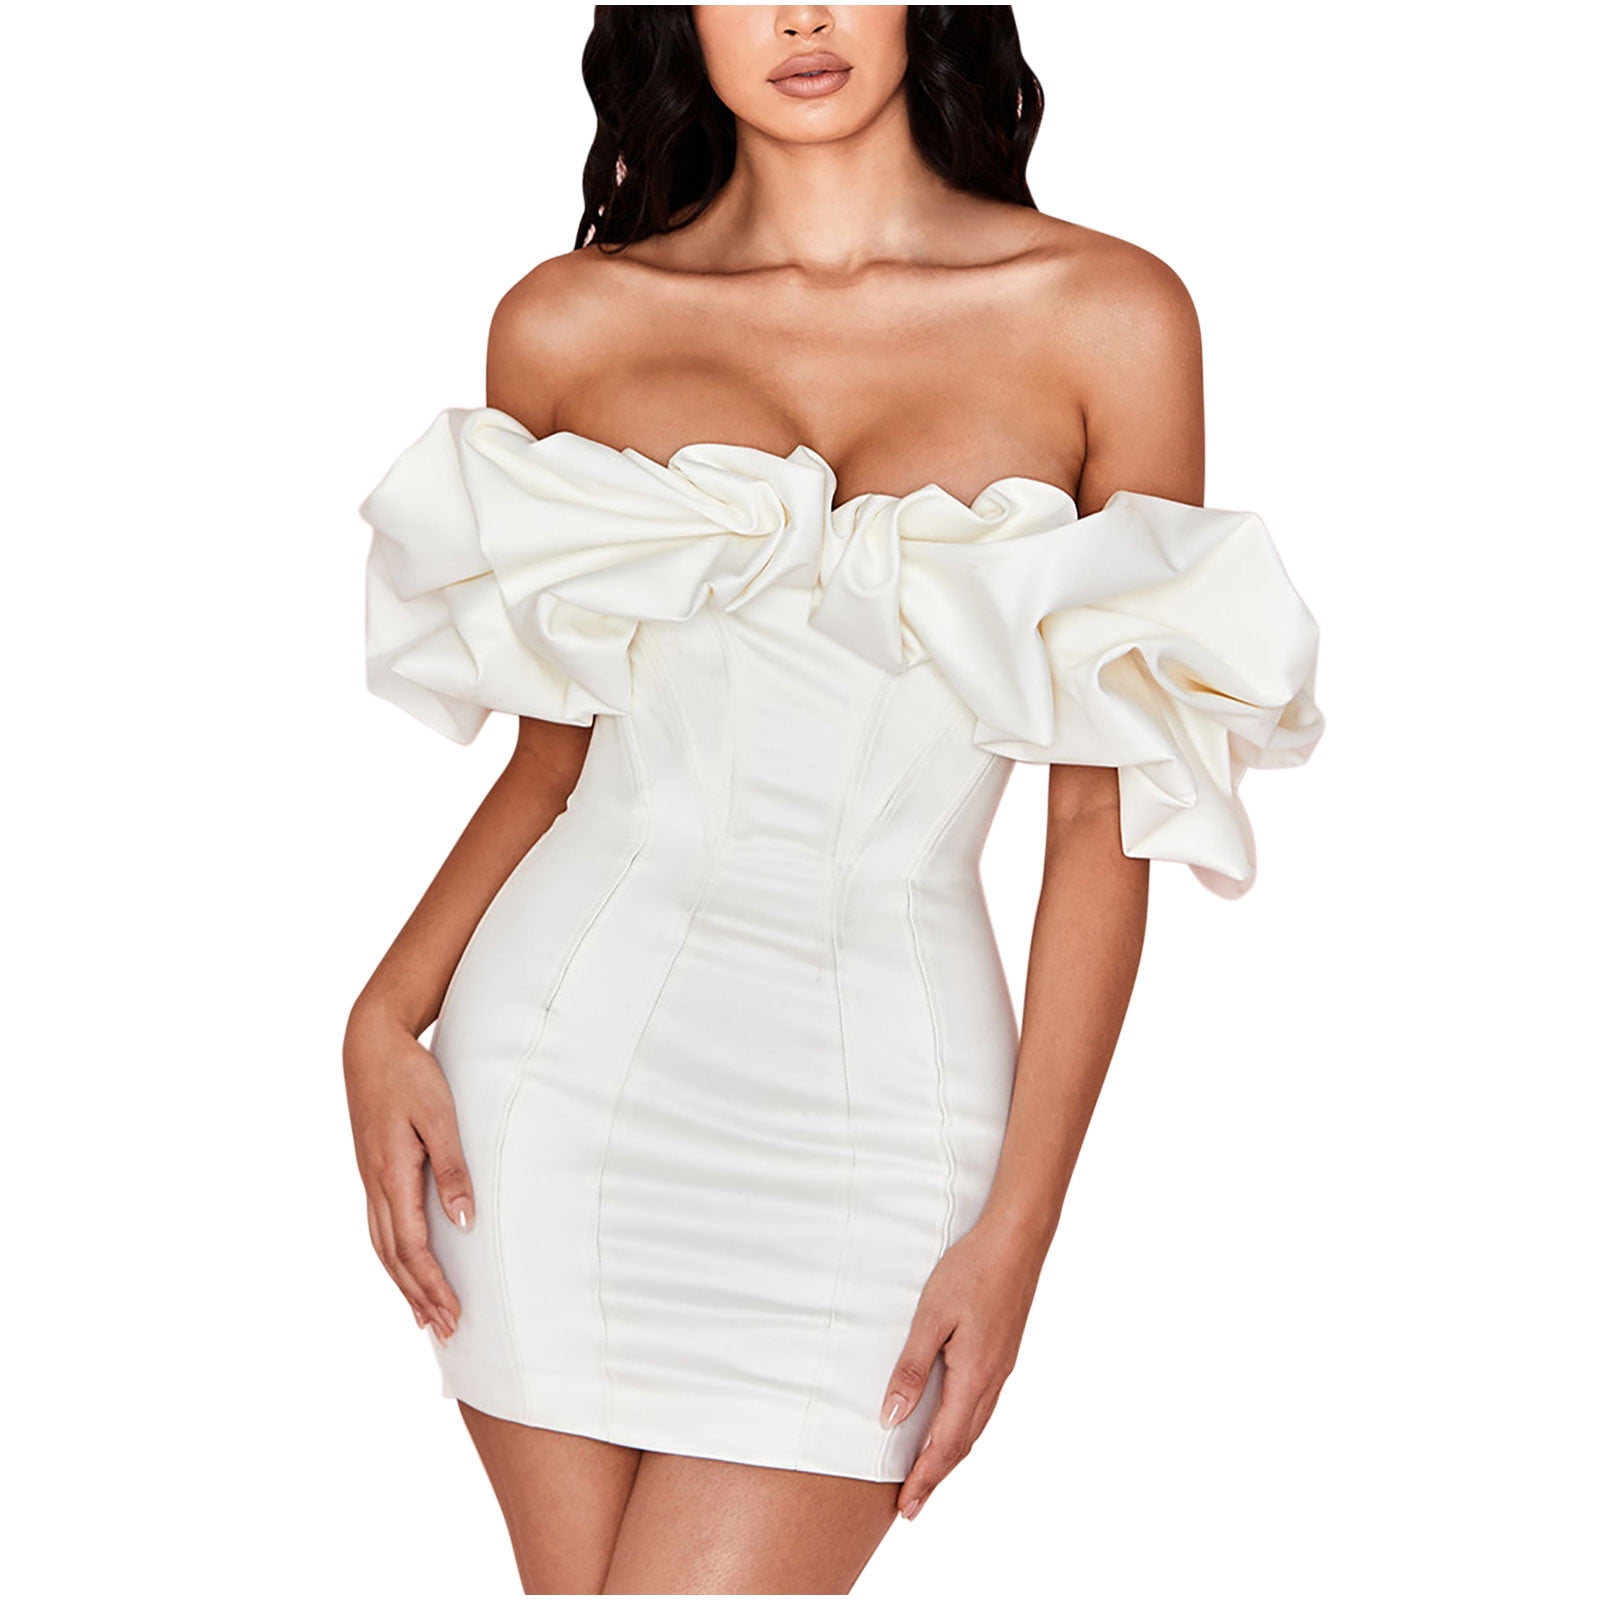 Sexy Dress for Women Flounce Puff Sleeve Off The Shoulder Bodycon Corset  Dress Slim Fit Party Club Mini Dress (X-Large, White) 